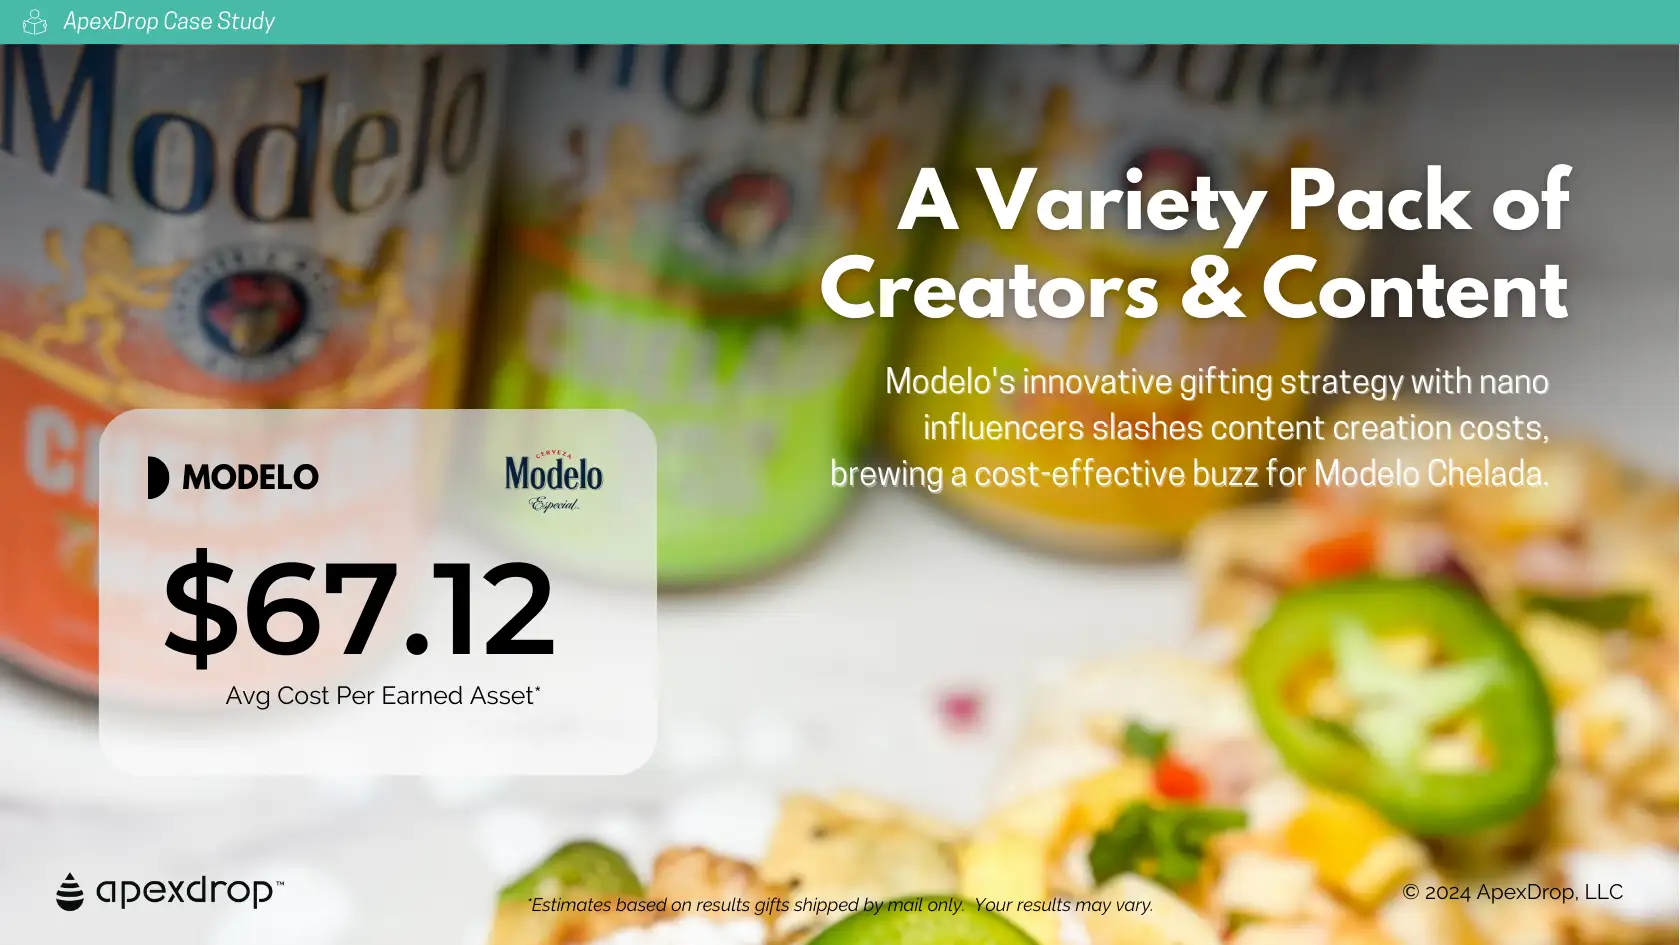 A Variety Pack of Creators & Content - Modelo's innovative gifting strategy with nano influencers slashes content creation costs, brewing a cost-effective buzz for Modelo Chelada.